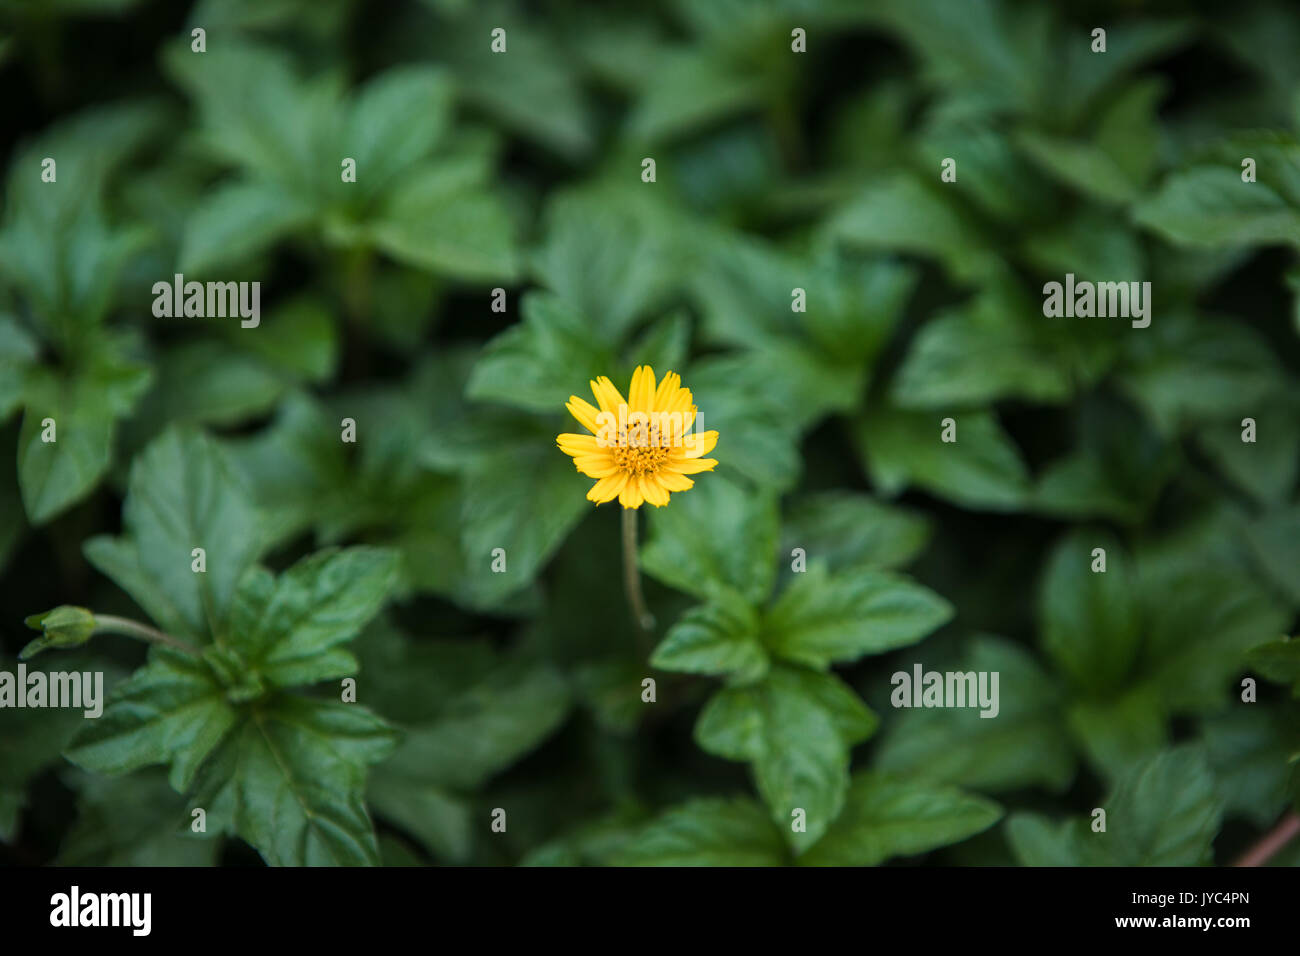 tiny small yellow flower green leaves Stock Photo